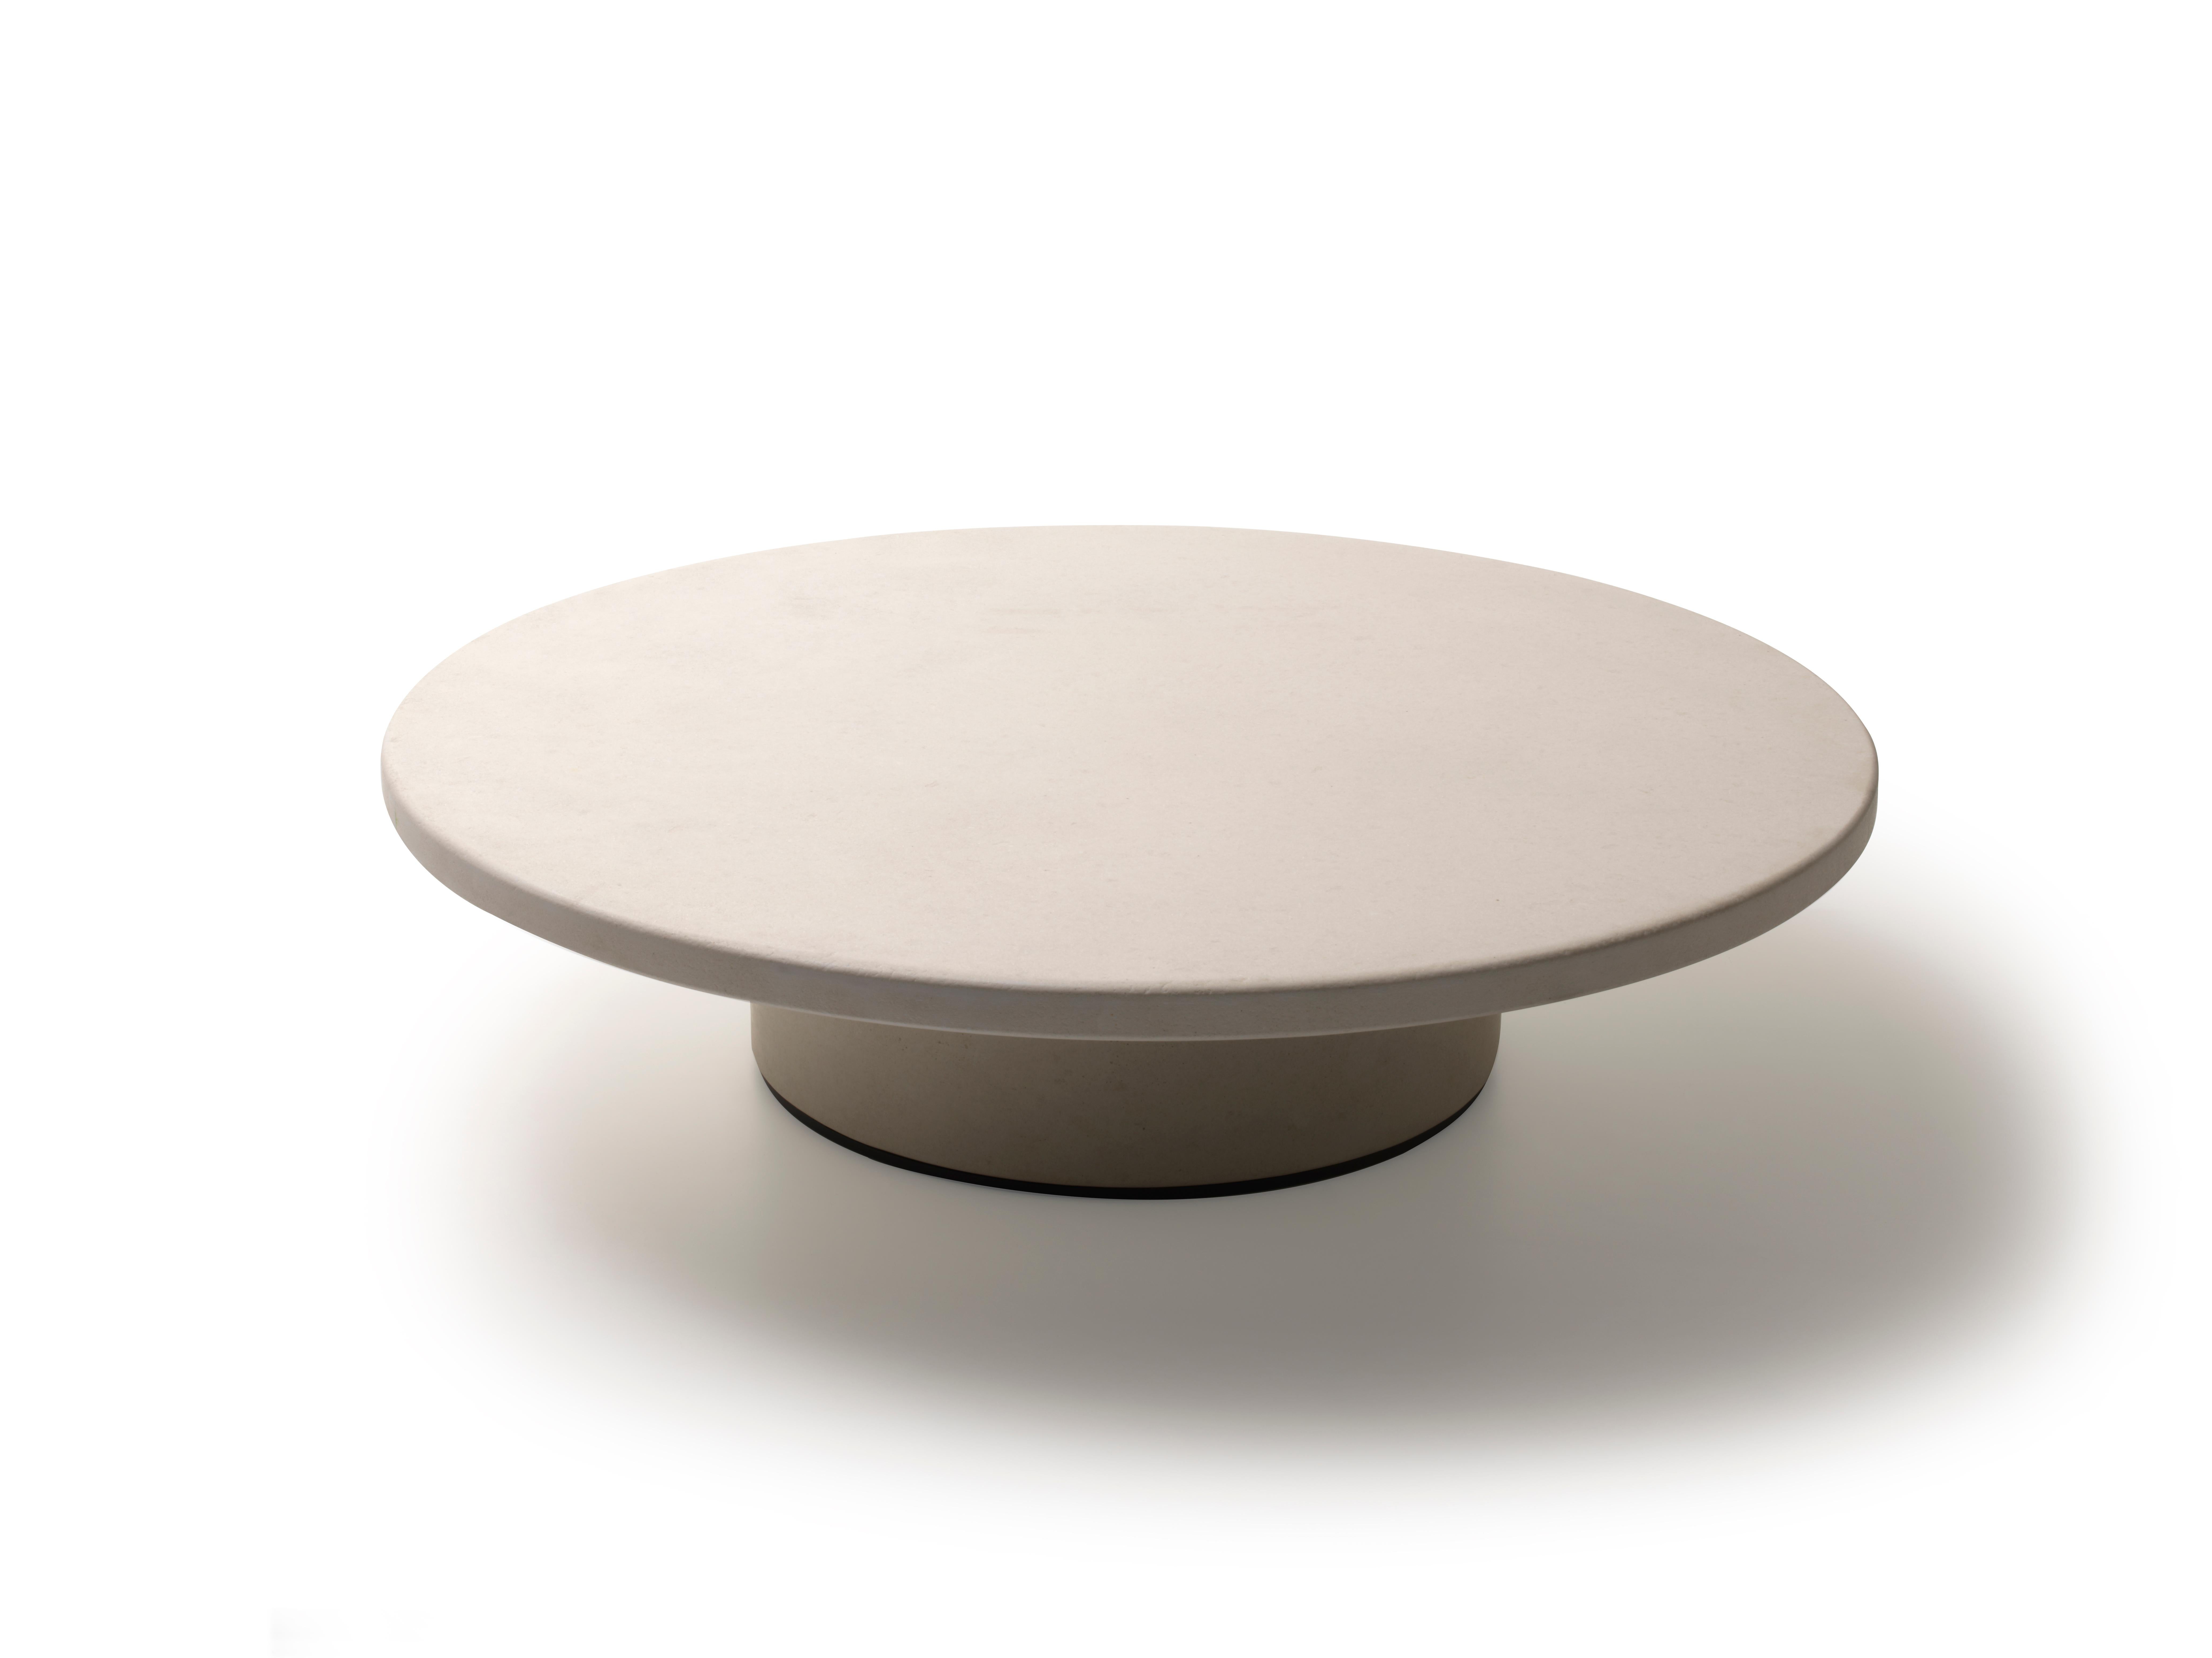 DS-612 coffee table by De Sede
Designer: Mario Ferrarini
Dimensions: D 120 x H 29 cm
Materials: mixtures of stone or metal; tabletop with MDF core. Column made of moulded plywood.
Colours: metal brass, metal iron, marble Carrara, stone coral,